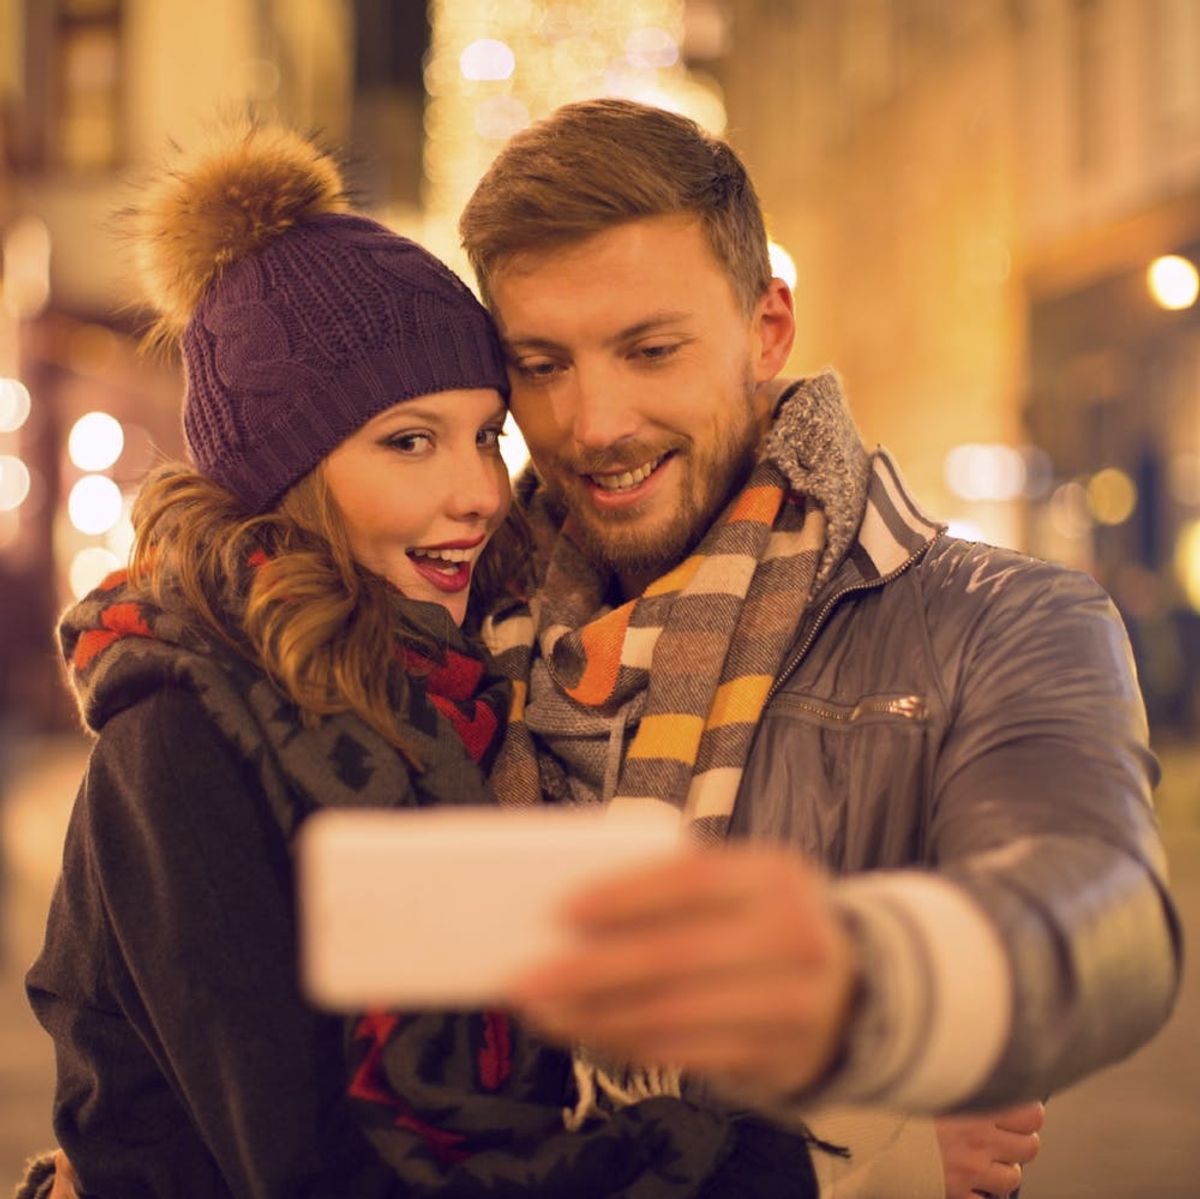 These Are the Best and Worst Cities to Spend Valentine’s Day In